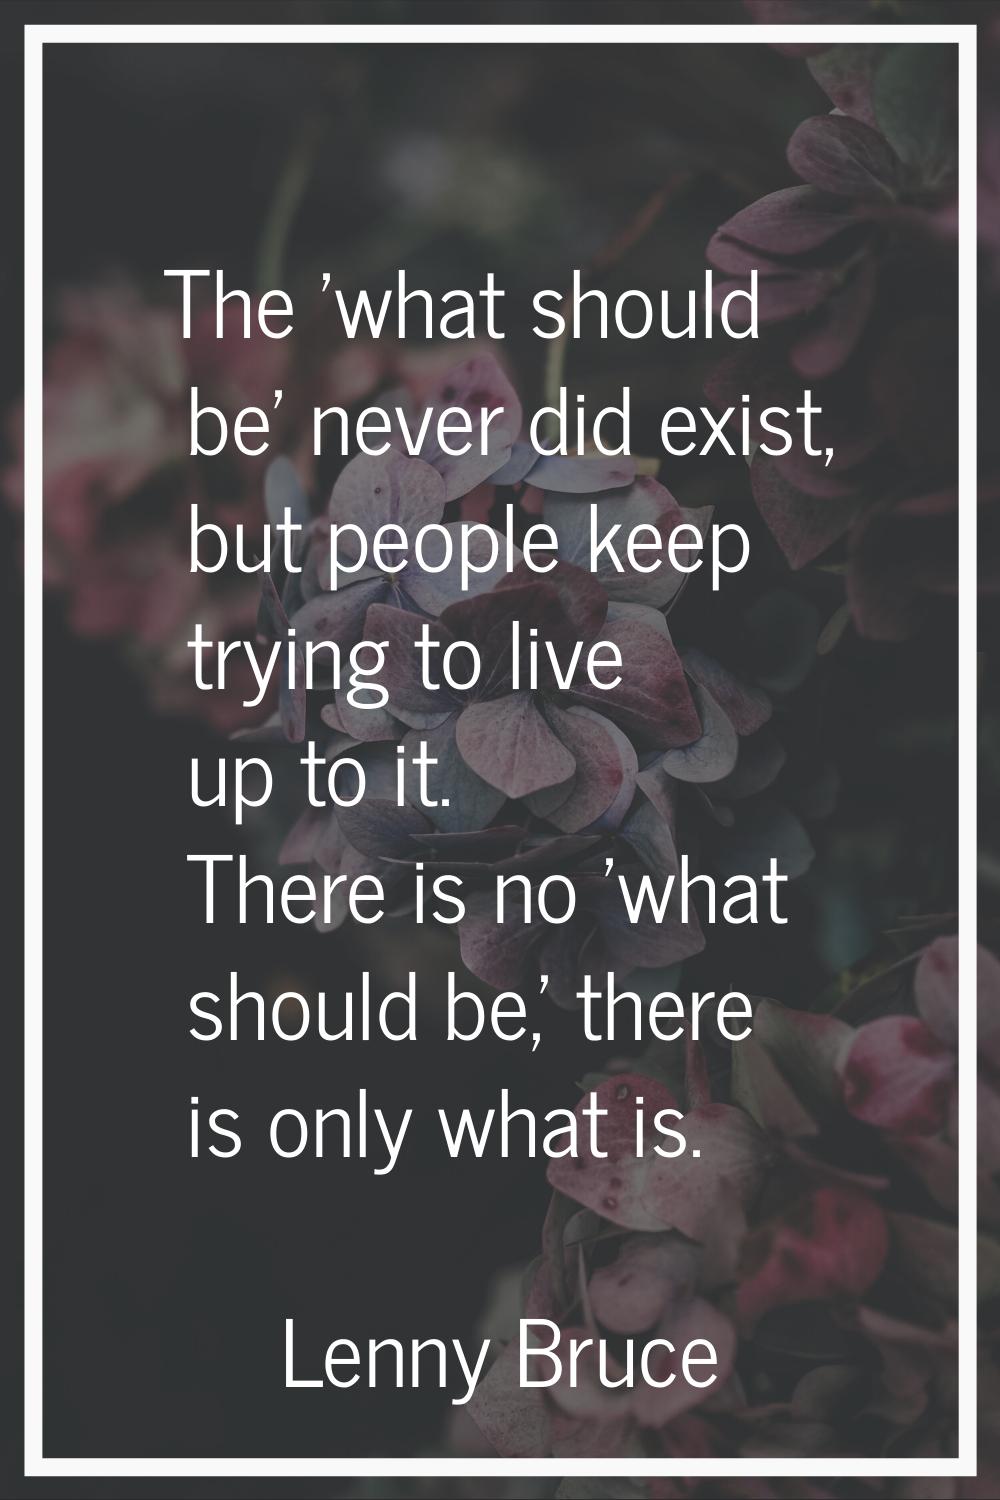 The 'what should be' never did exist, but people keep trying to live up to it. There is no 'what sh